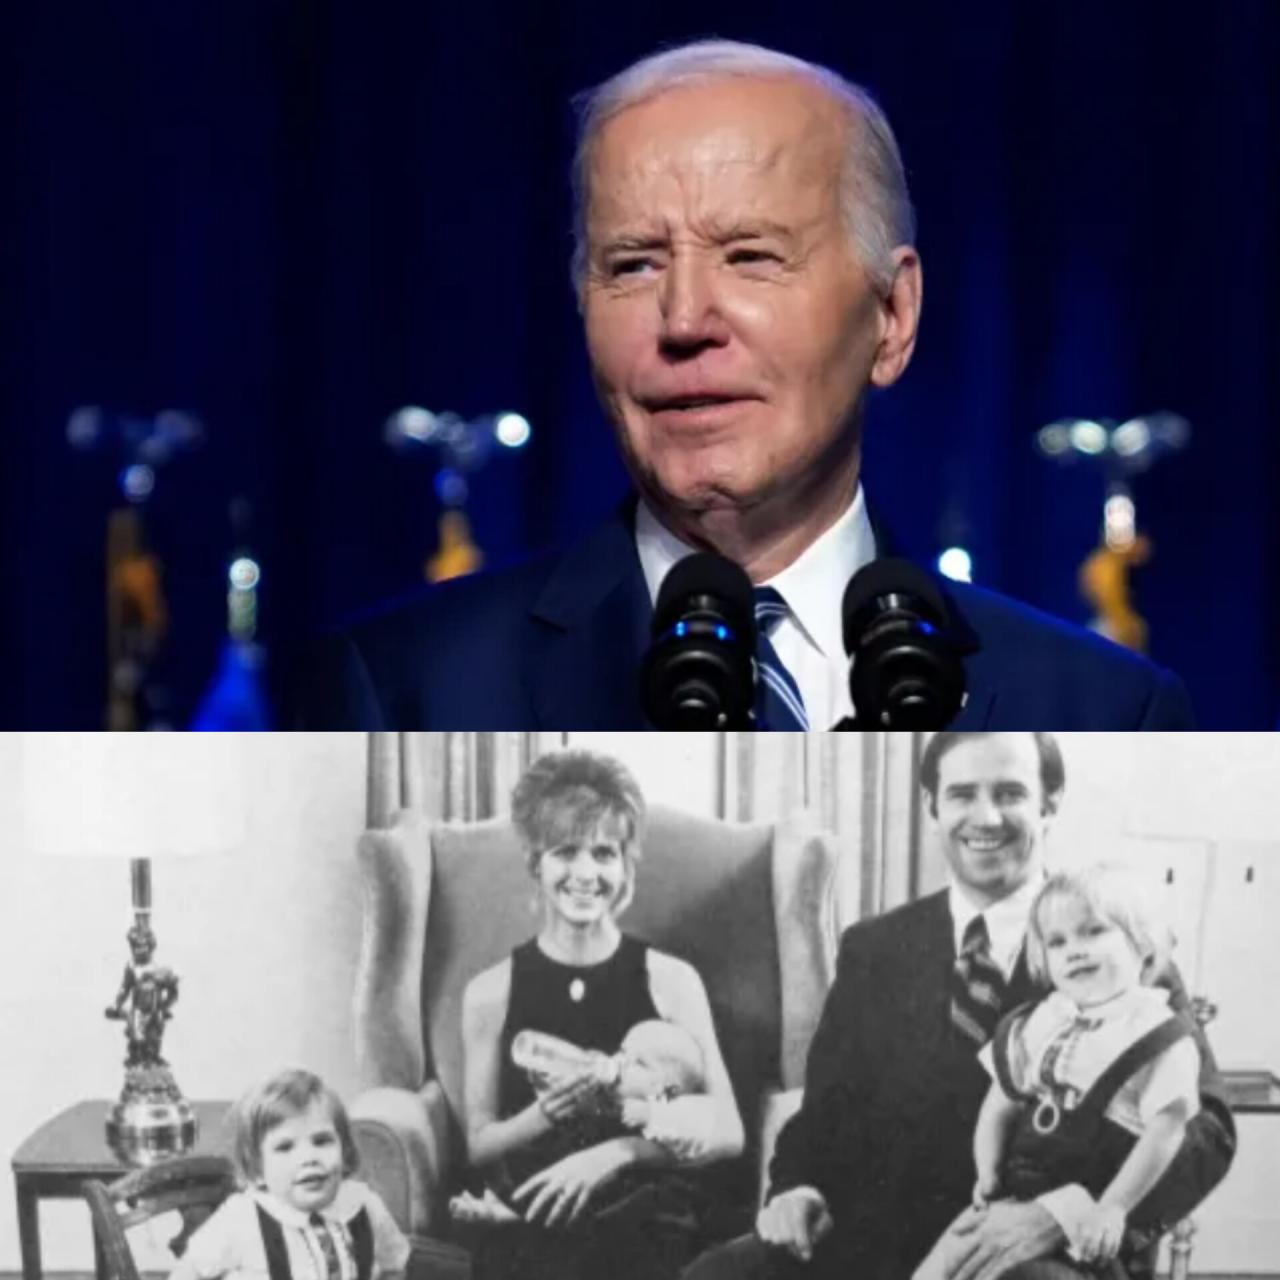 President Joe Biden reveals he contemplated suicide after his first wife and 13-month-old daughter died in car crash